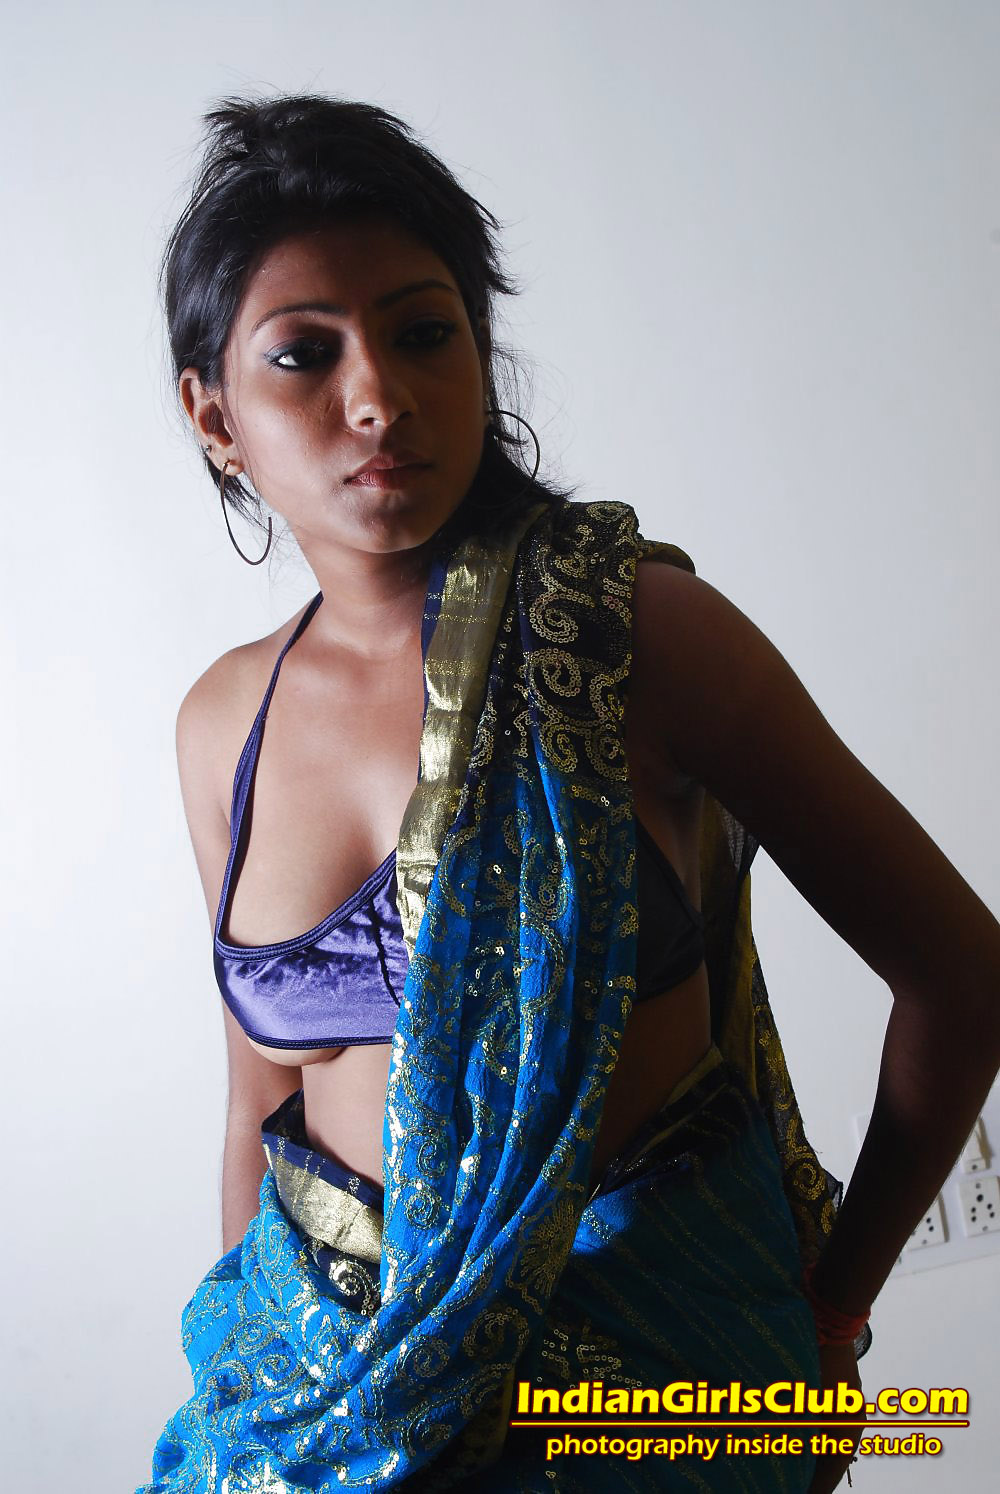 Indian Girls Nude Photography: Inside The Studio - Part 16 - Indian Girls  Club